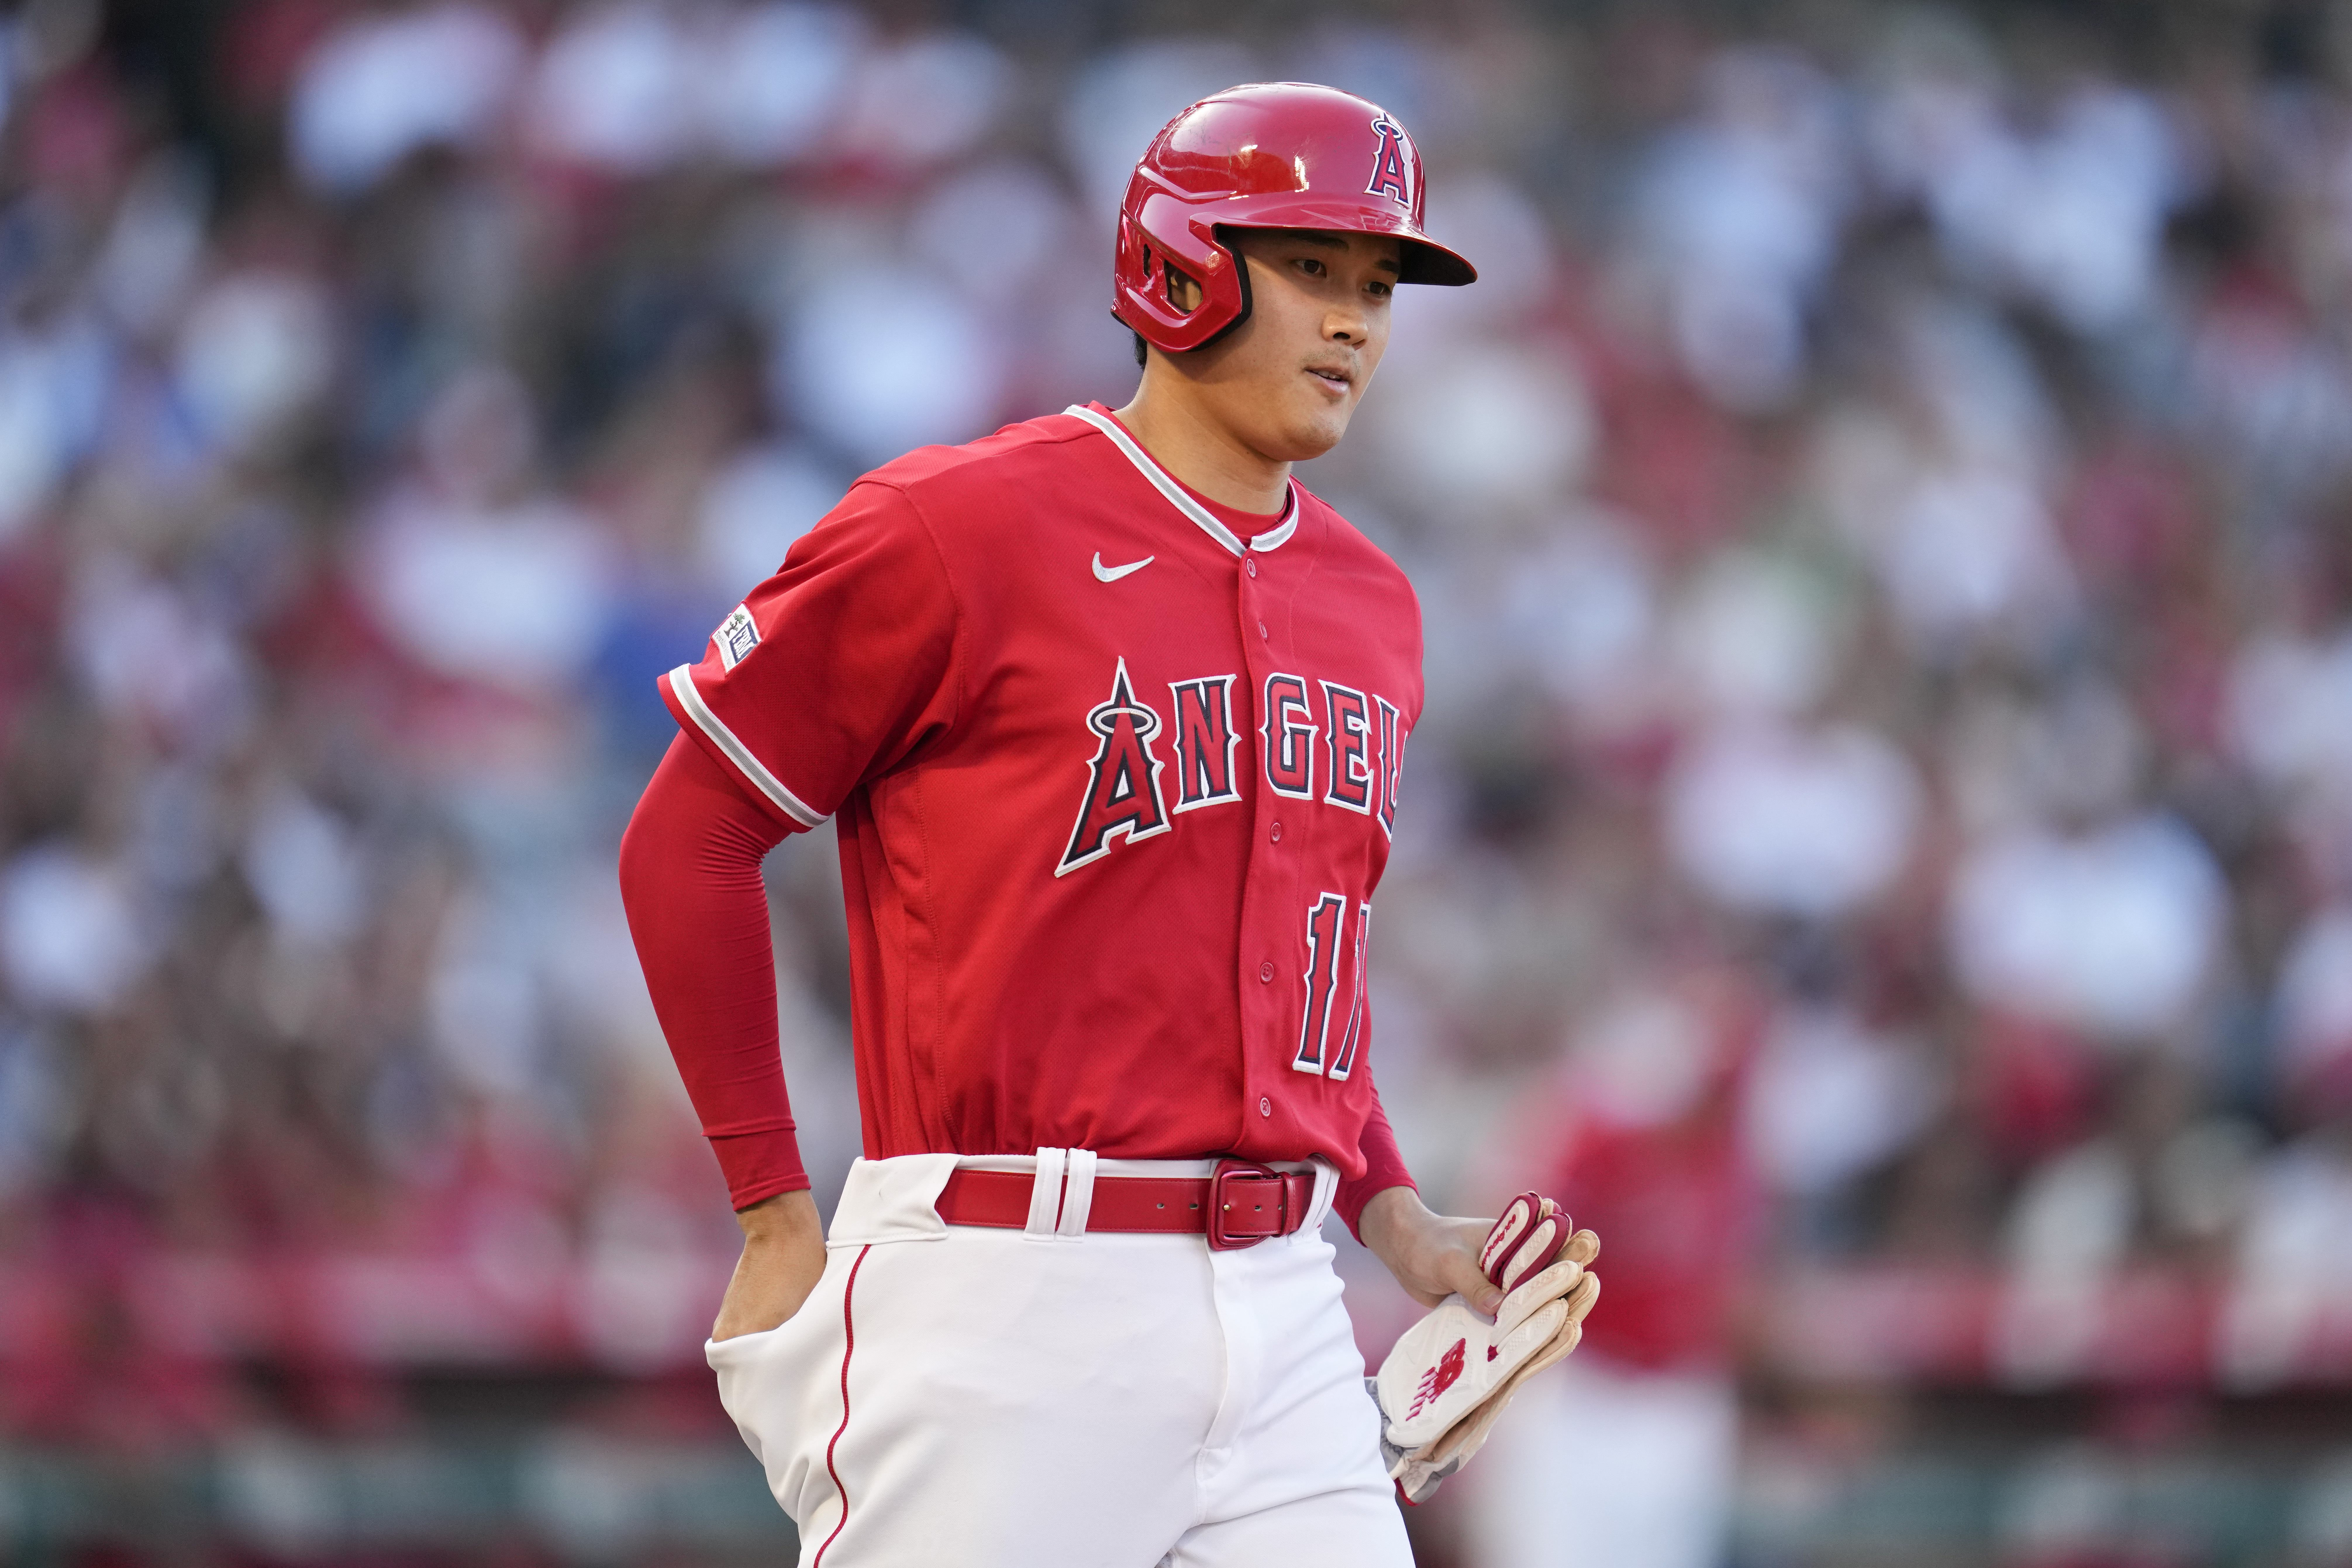 Marketing Shohei Ohtani is a popular and comprehensive experience